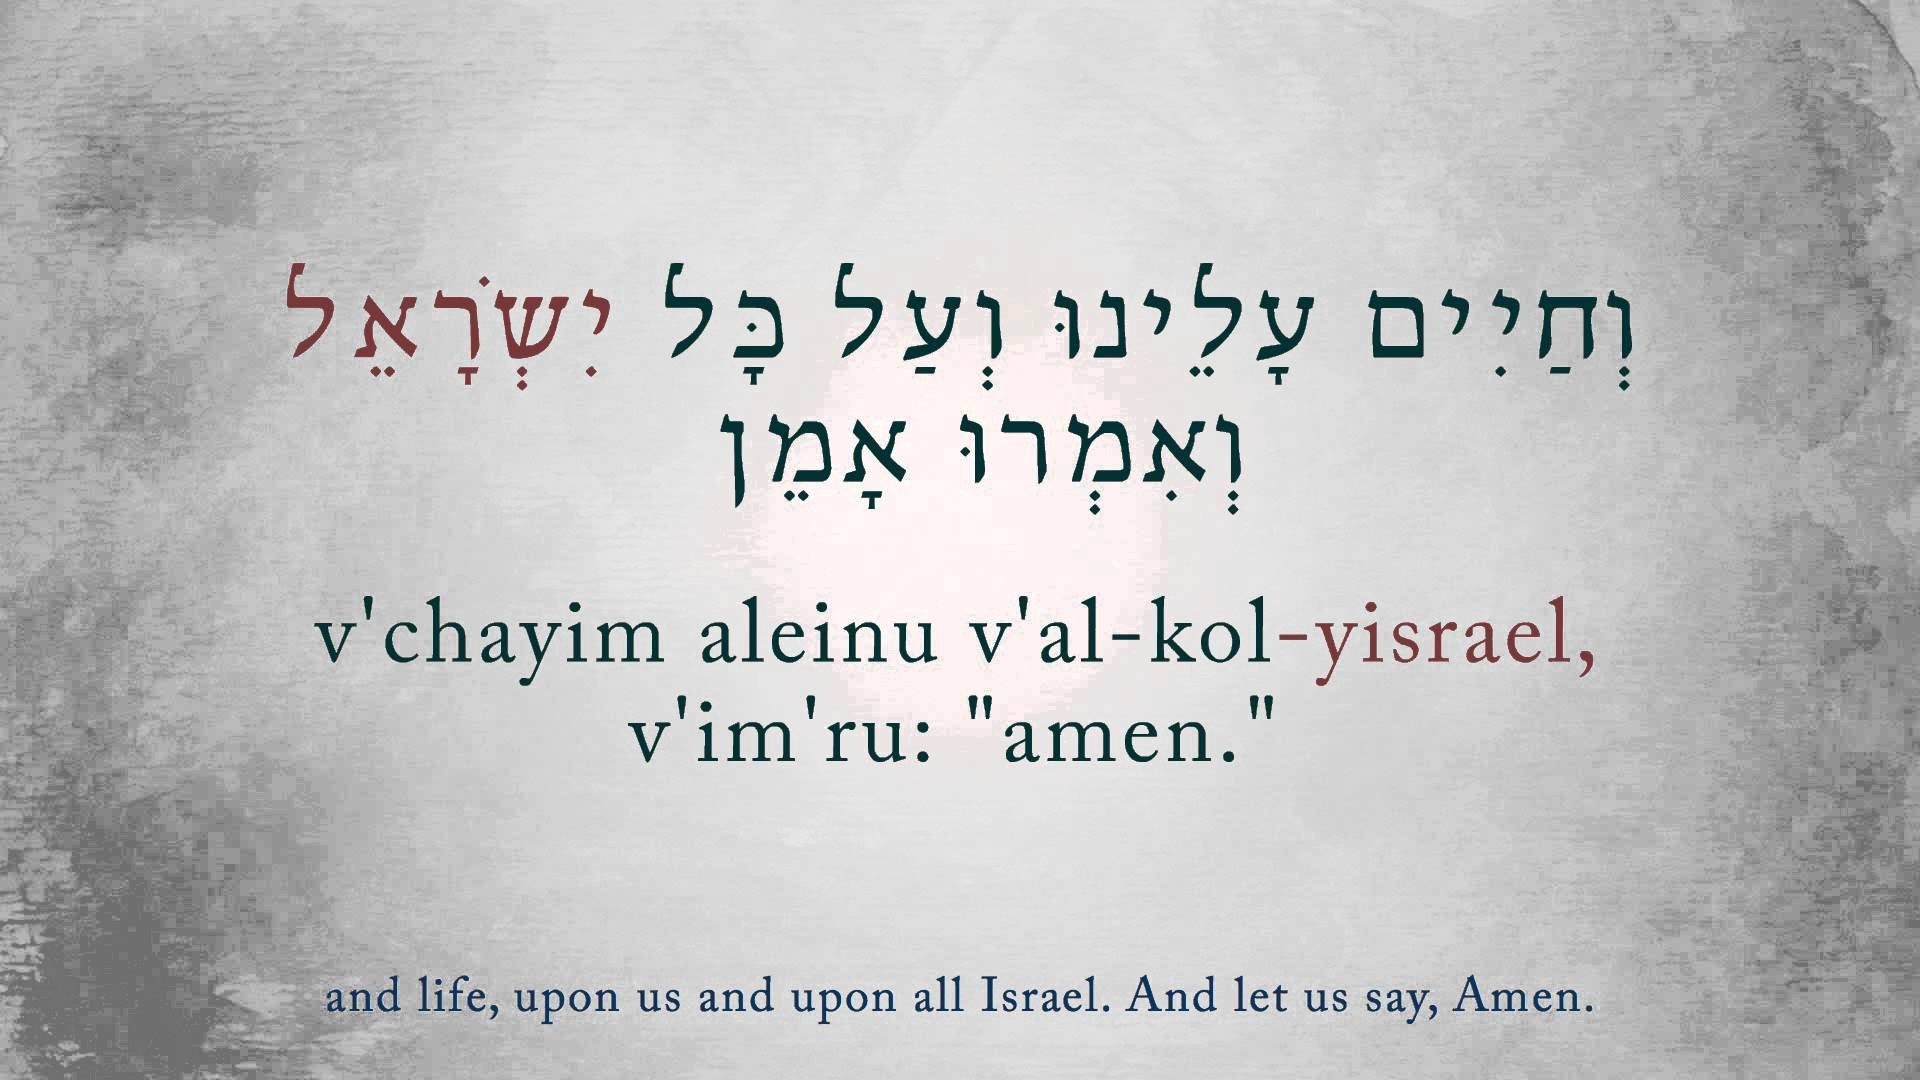 1920x1080 How to Say the Mourners Kaddish - The Jewish Prayer of Mourning has been an  important part of Jewish bereavement rituals for centuries, and continues  to be ...